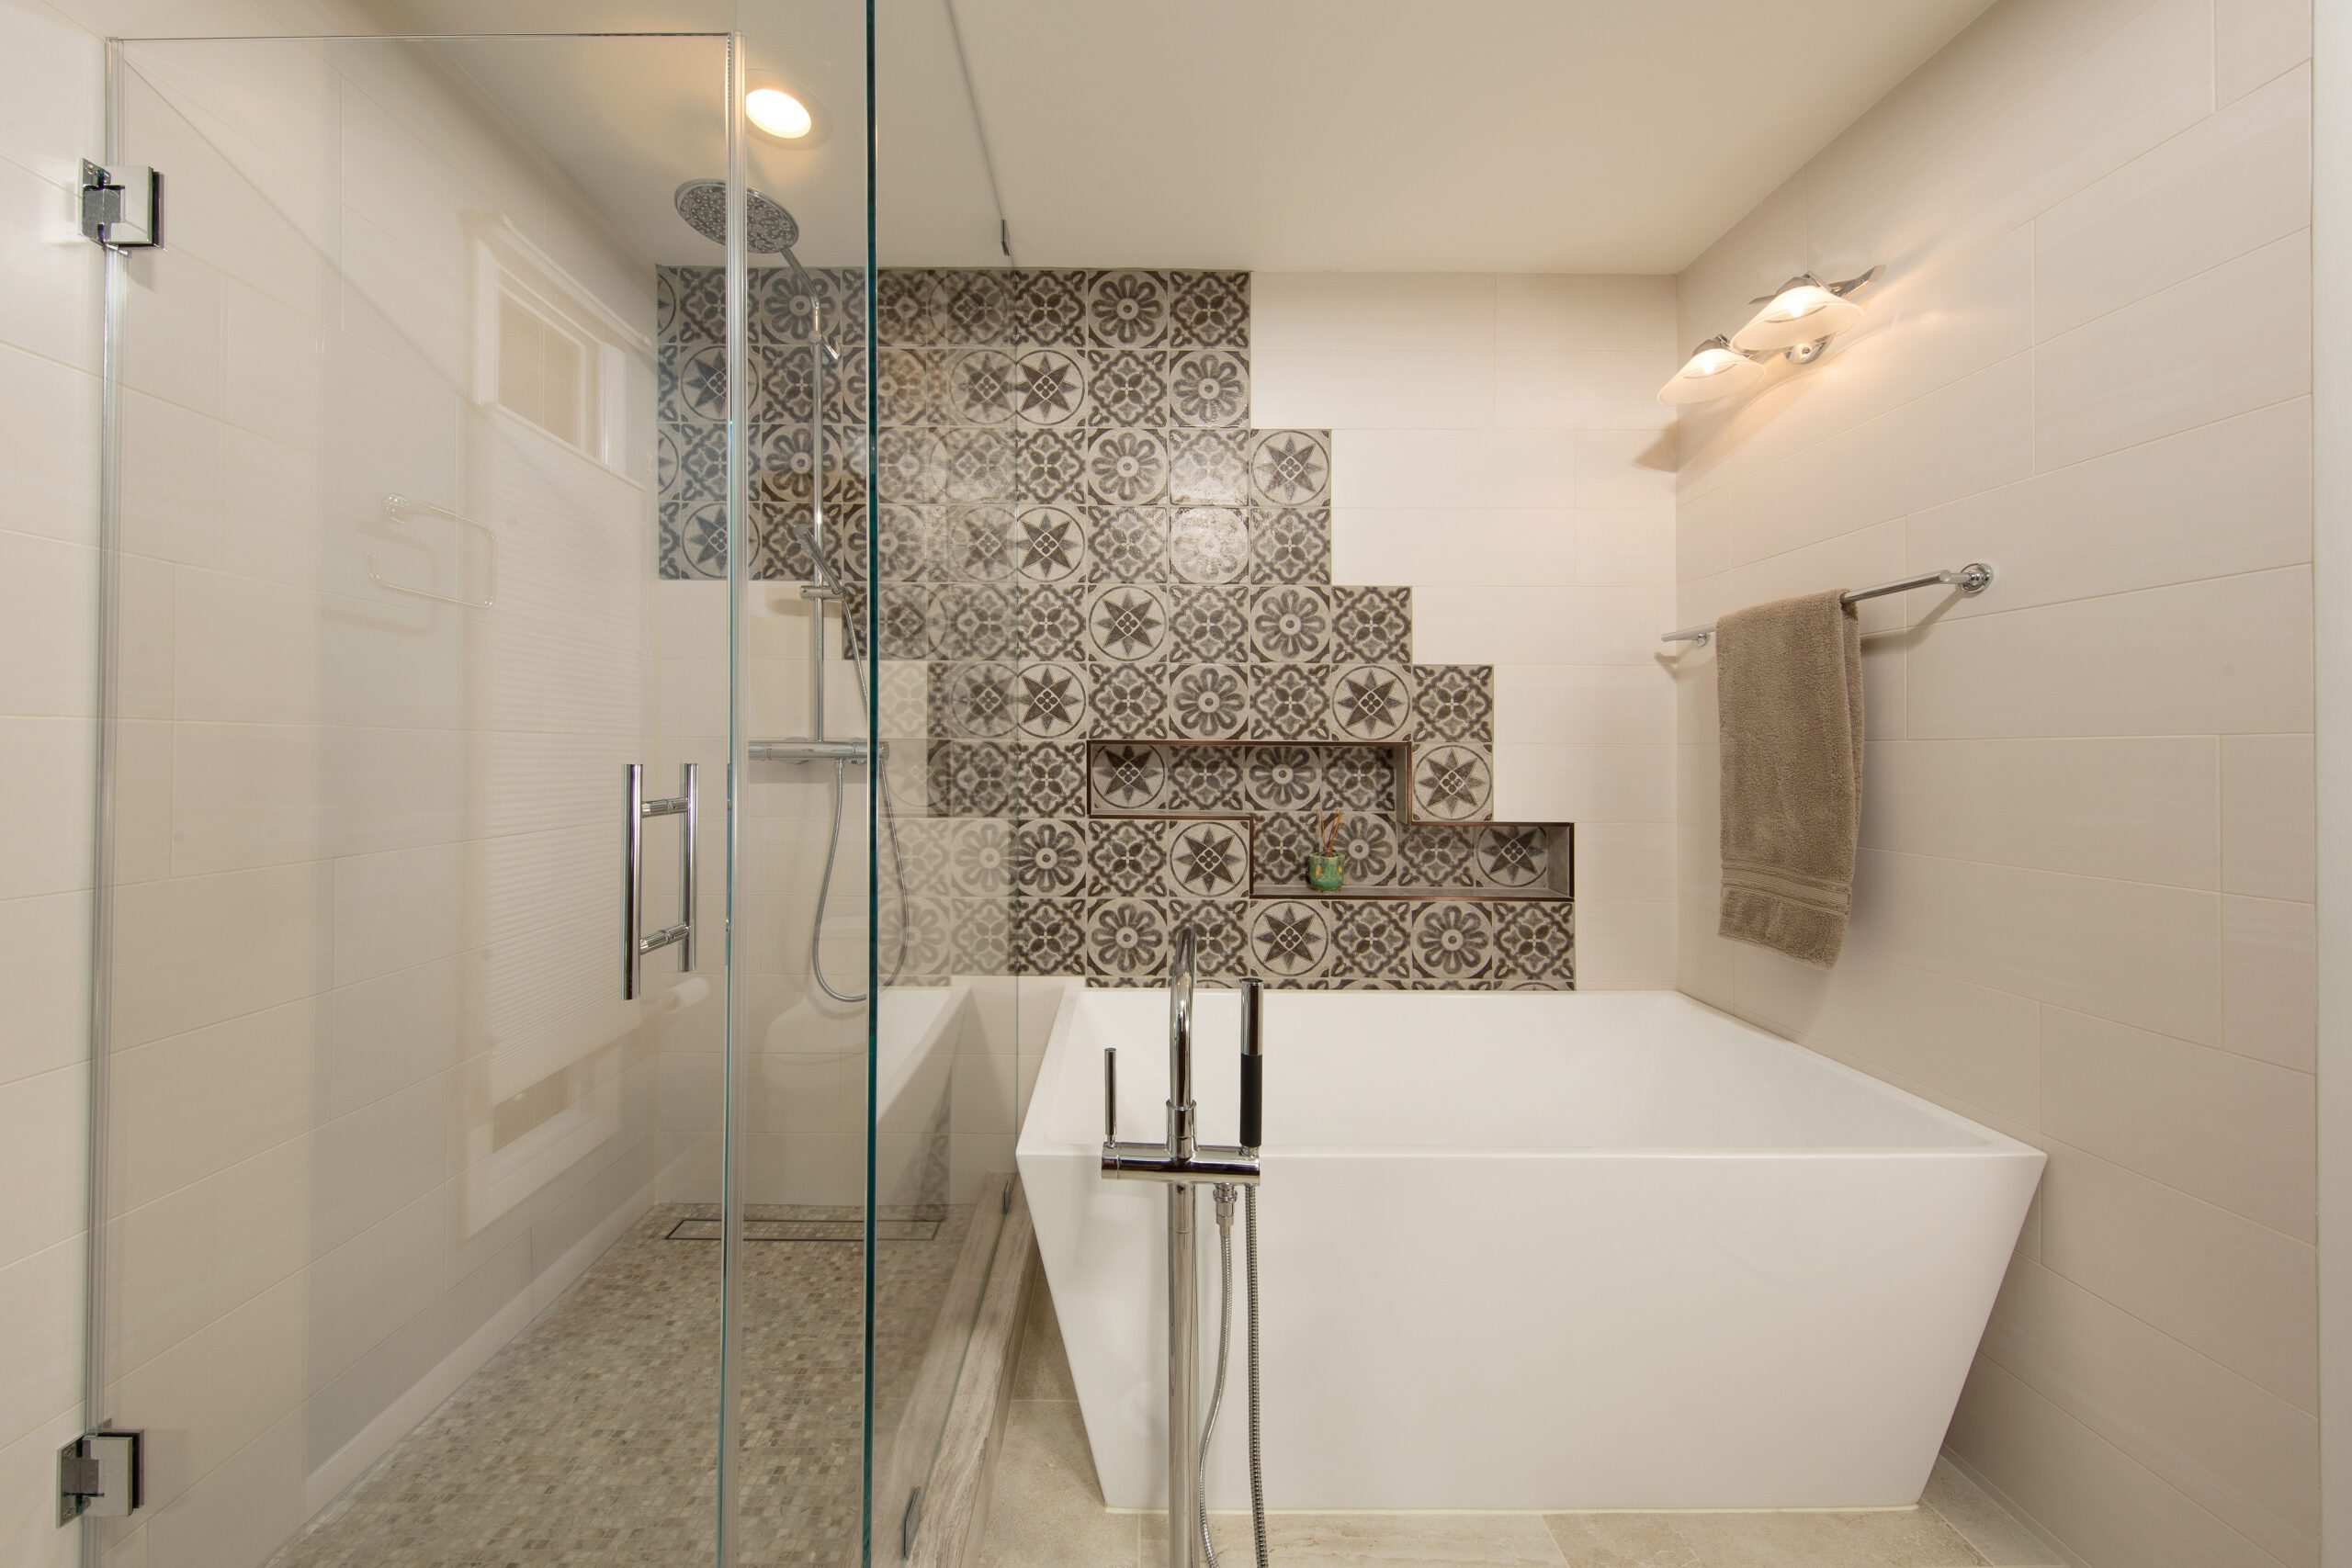 A photo of custom tile work and an oversized free-standing tub in a European style bathroom